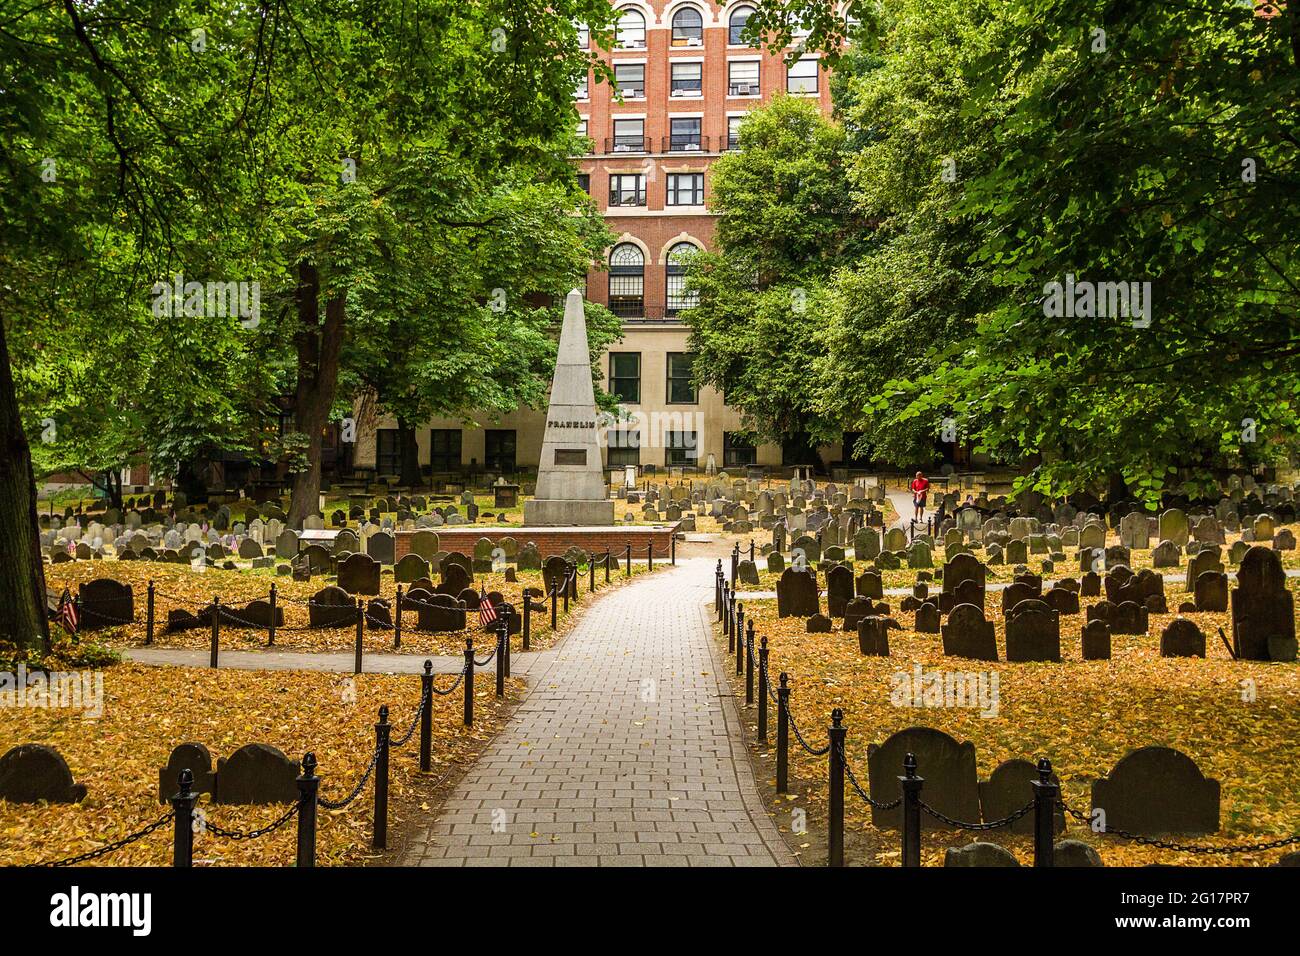 Wide angle image of the Granary Burying Ground in Boston Stock Photo